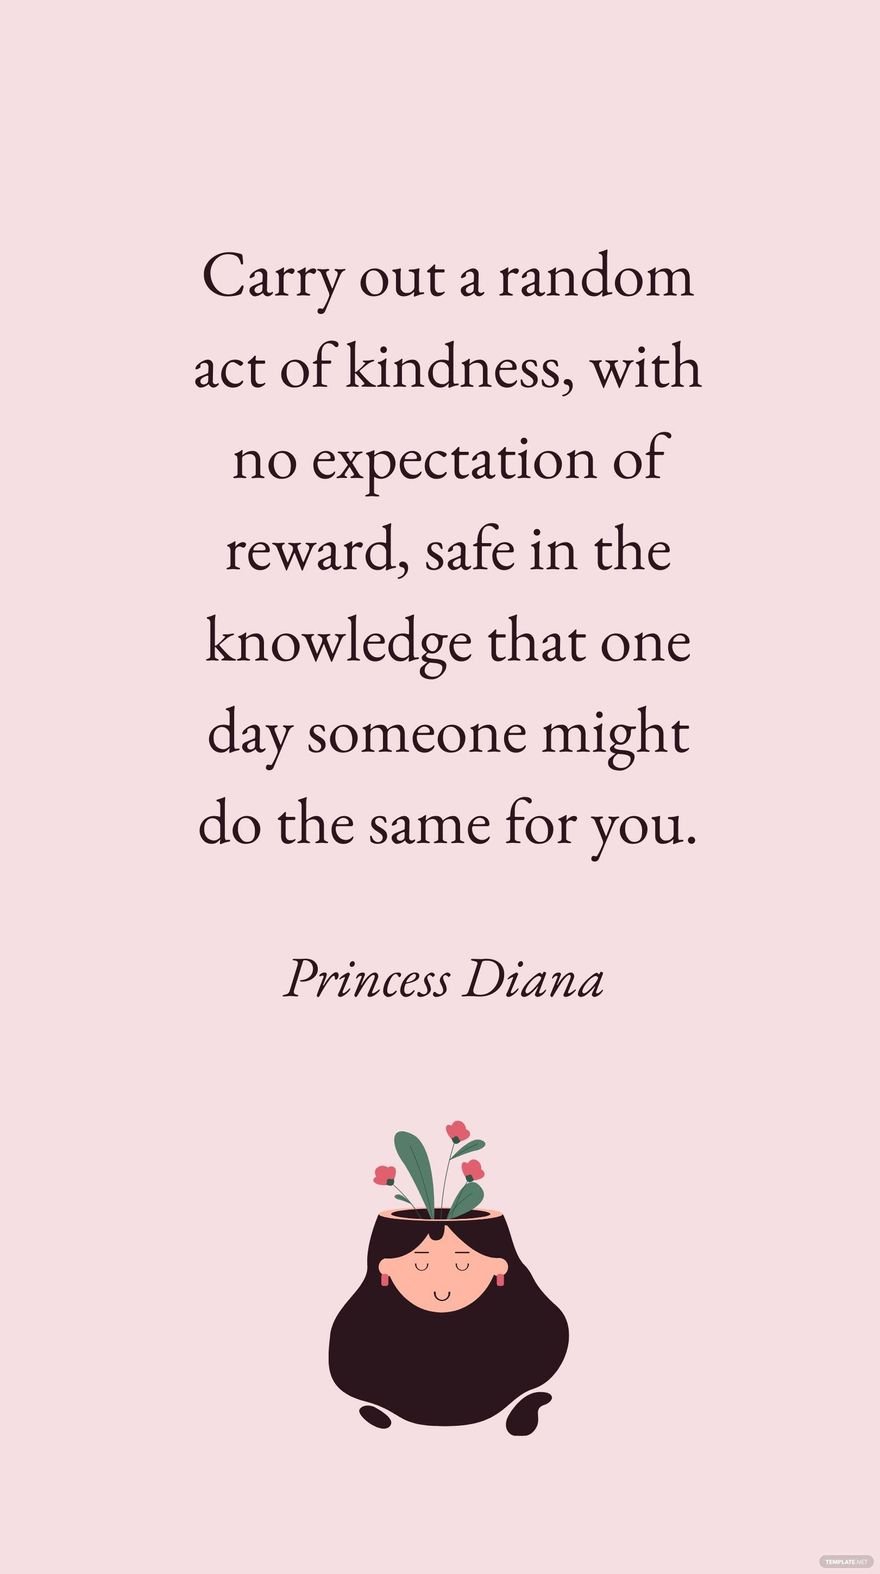 Princess Diana - Carry out a random act of kindness, with no expectation of reward, safe in the knowledge that one day someone might do the same for you.